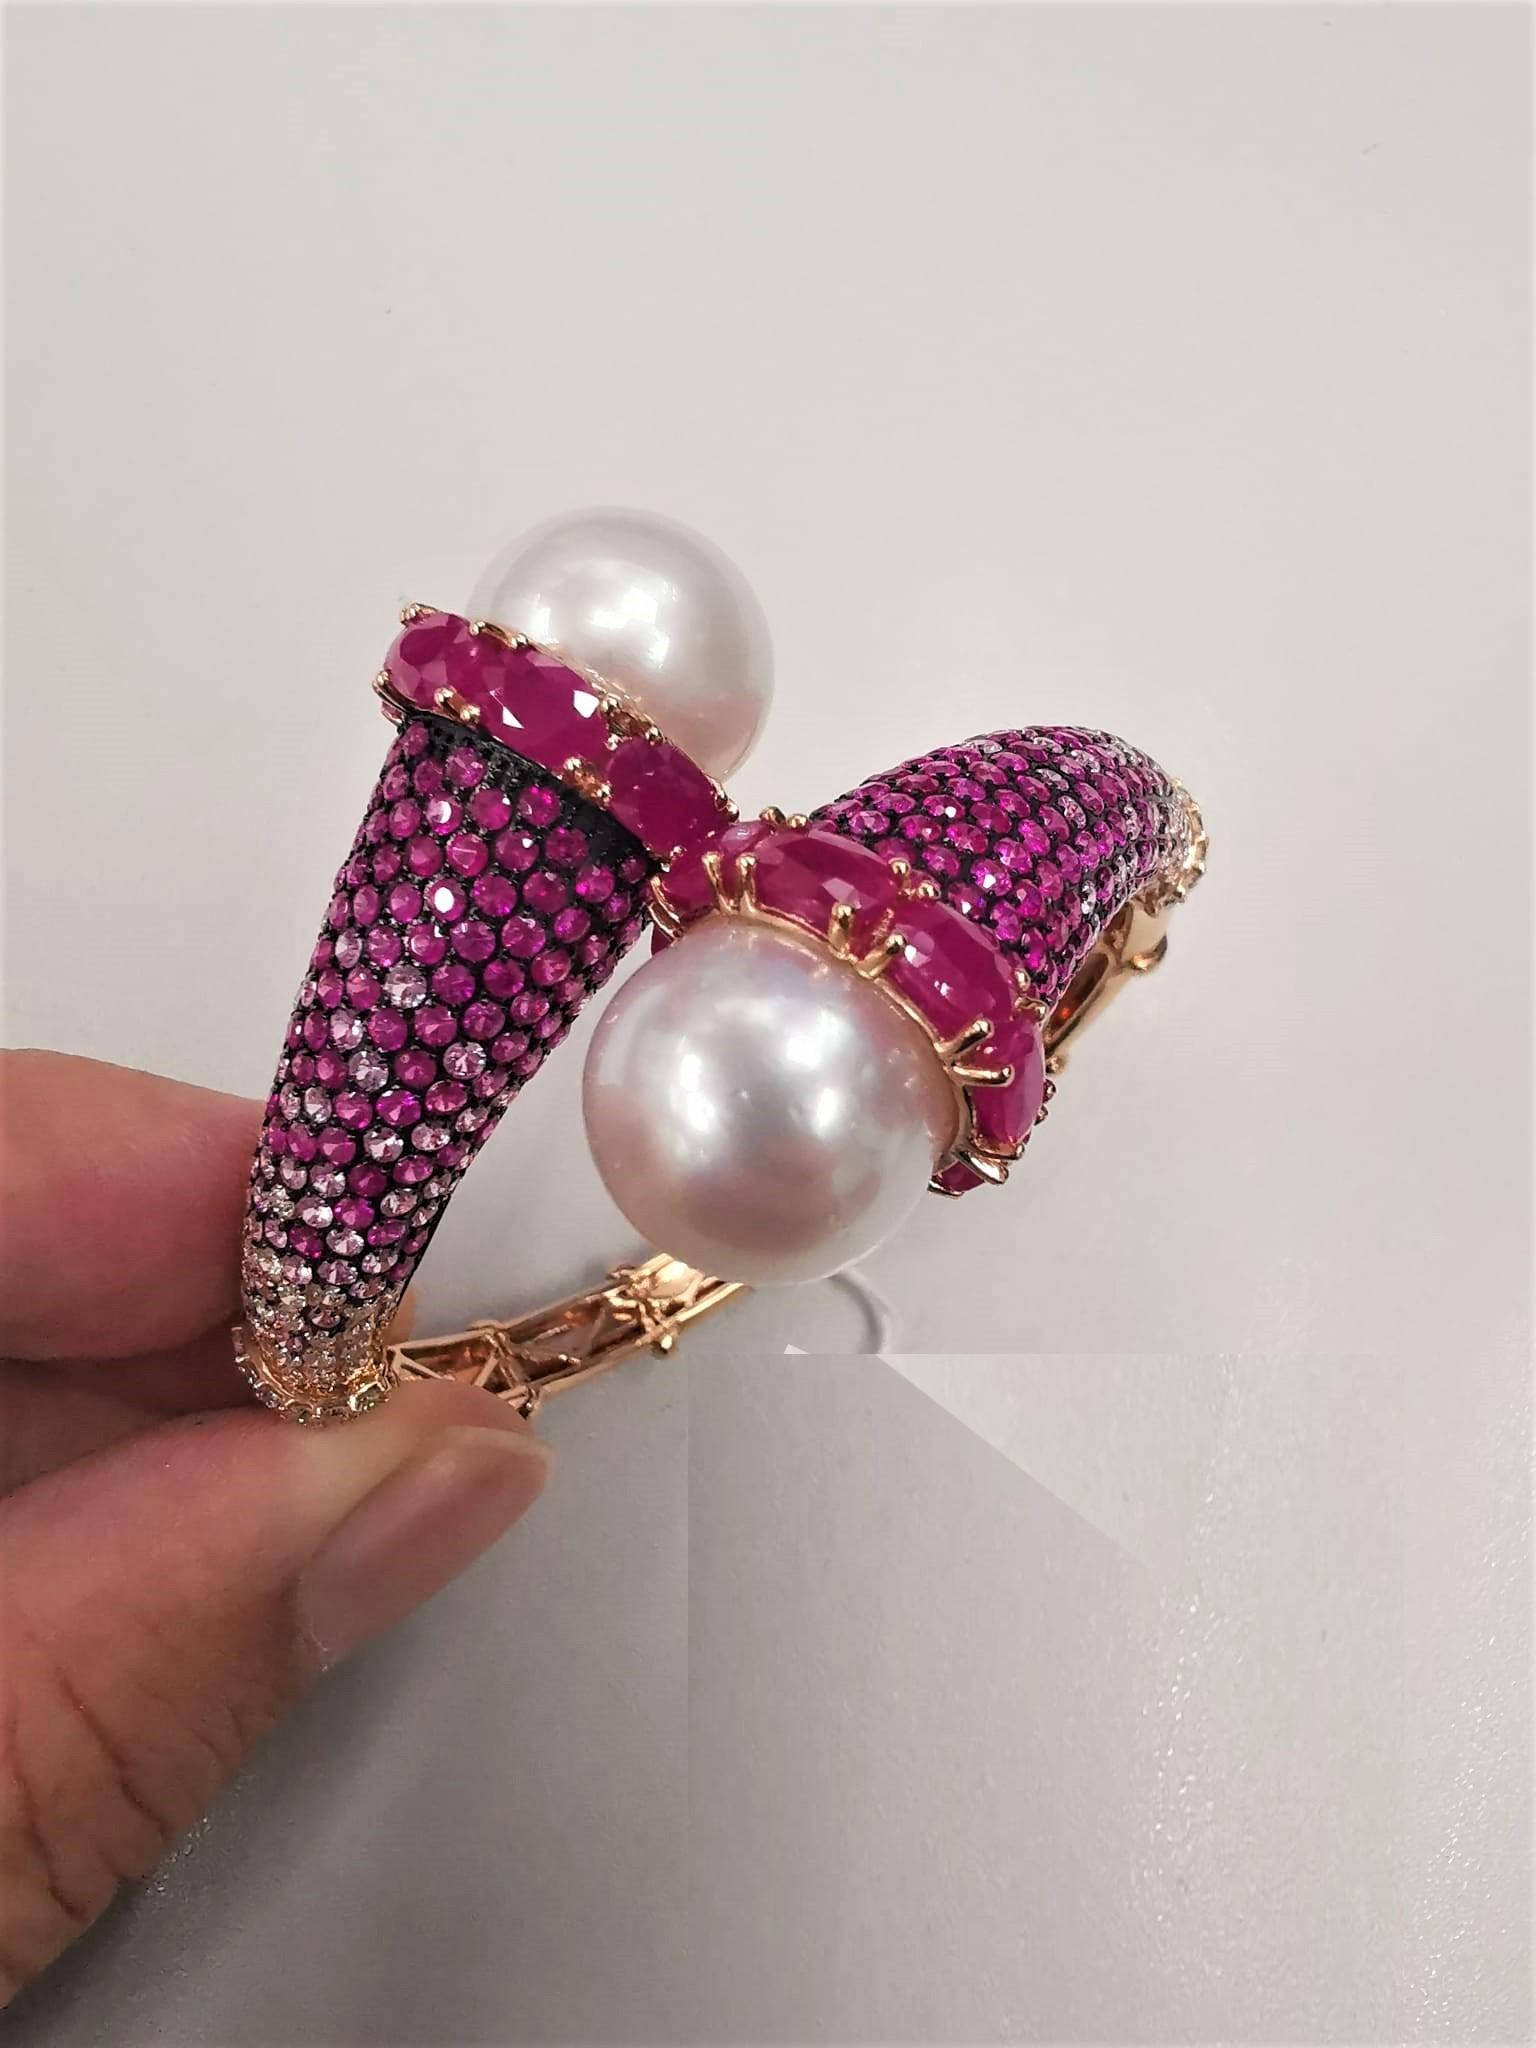 The Following Item we are offering is this Extremely Rare Beautiful 18KT Gold Fine Fancy Rare Large South Sea Pearl Ruby Sapphire Diamond Bangle Bracelet. This Magnificent Bangle is comprised of Rare Fine Large South Sea Pearls and Round Gorgeous